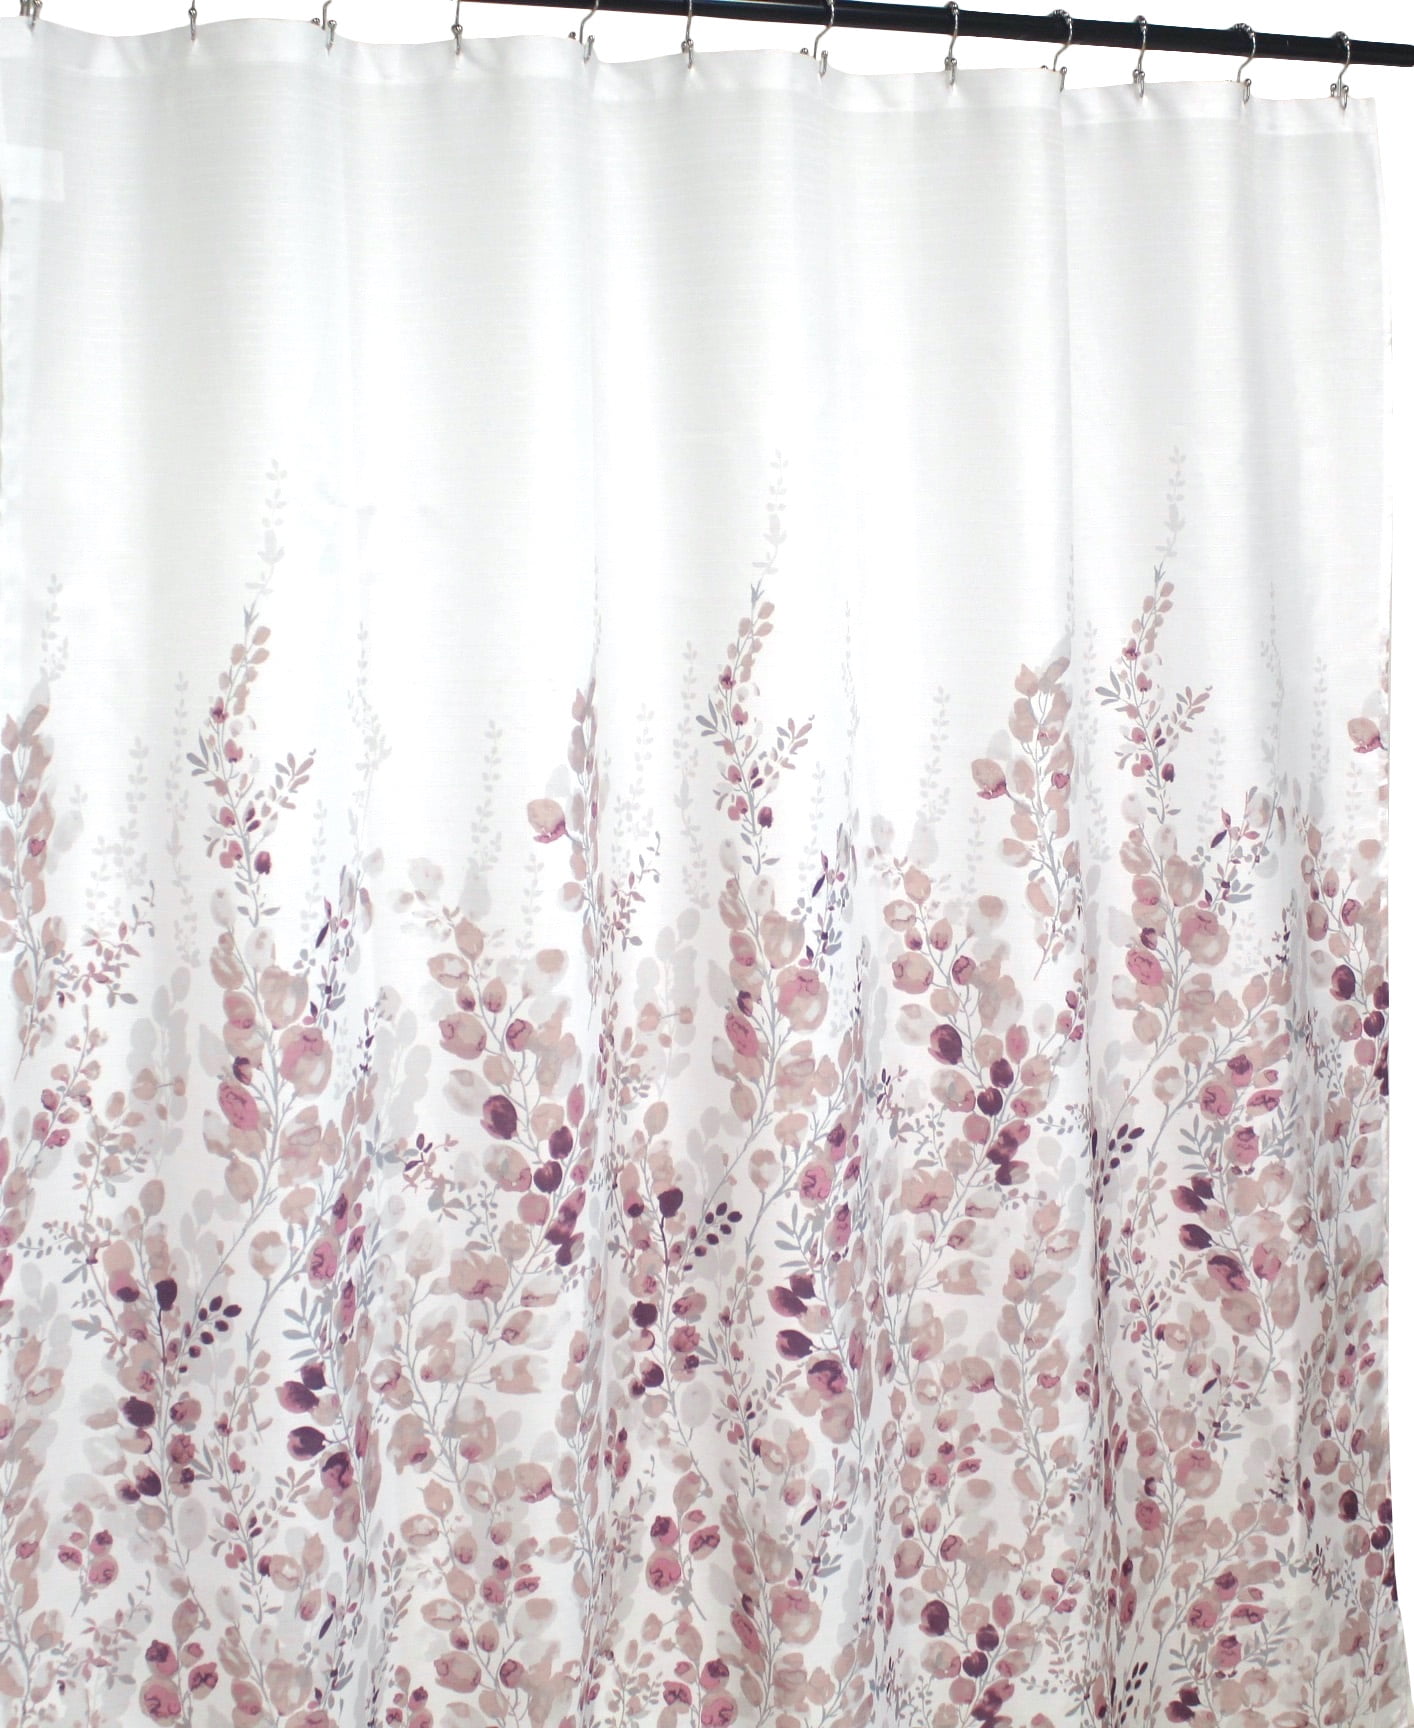 Details about   SALLY TEXTILES INC Luxury Fabric Shower Curtain Shimmering Textured Jacquard Cl 